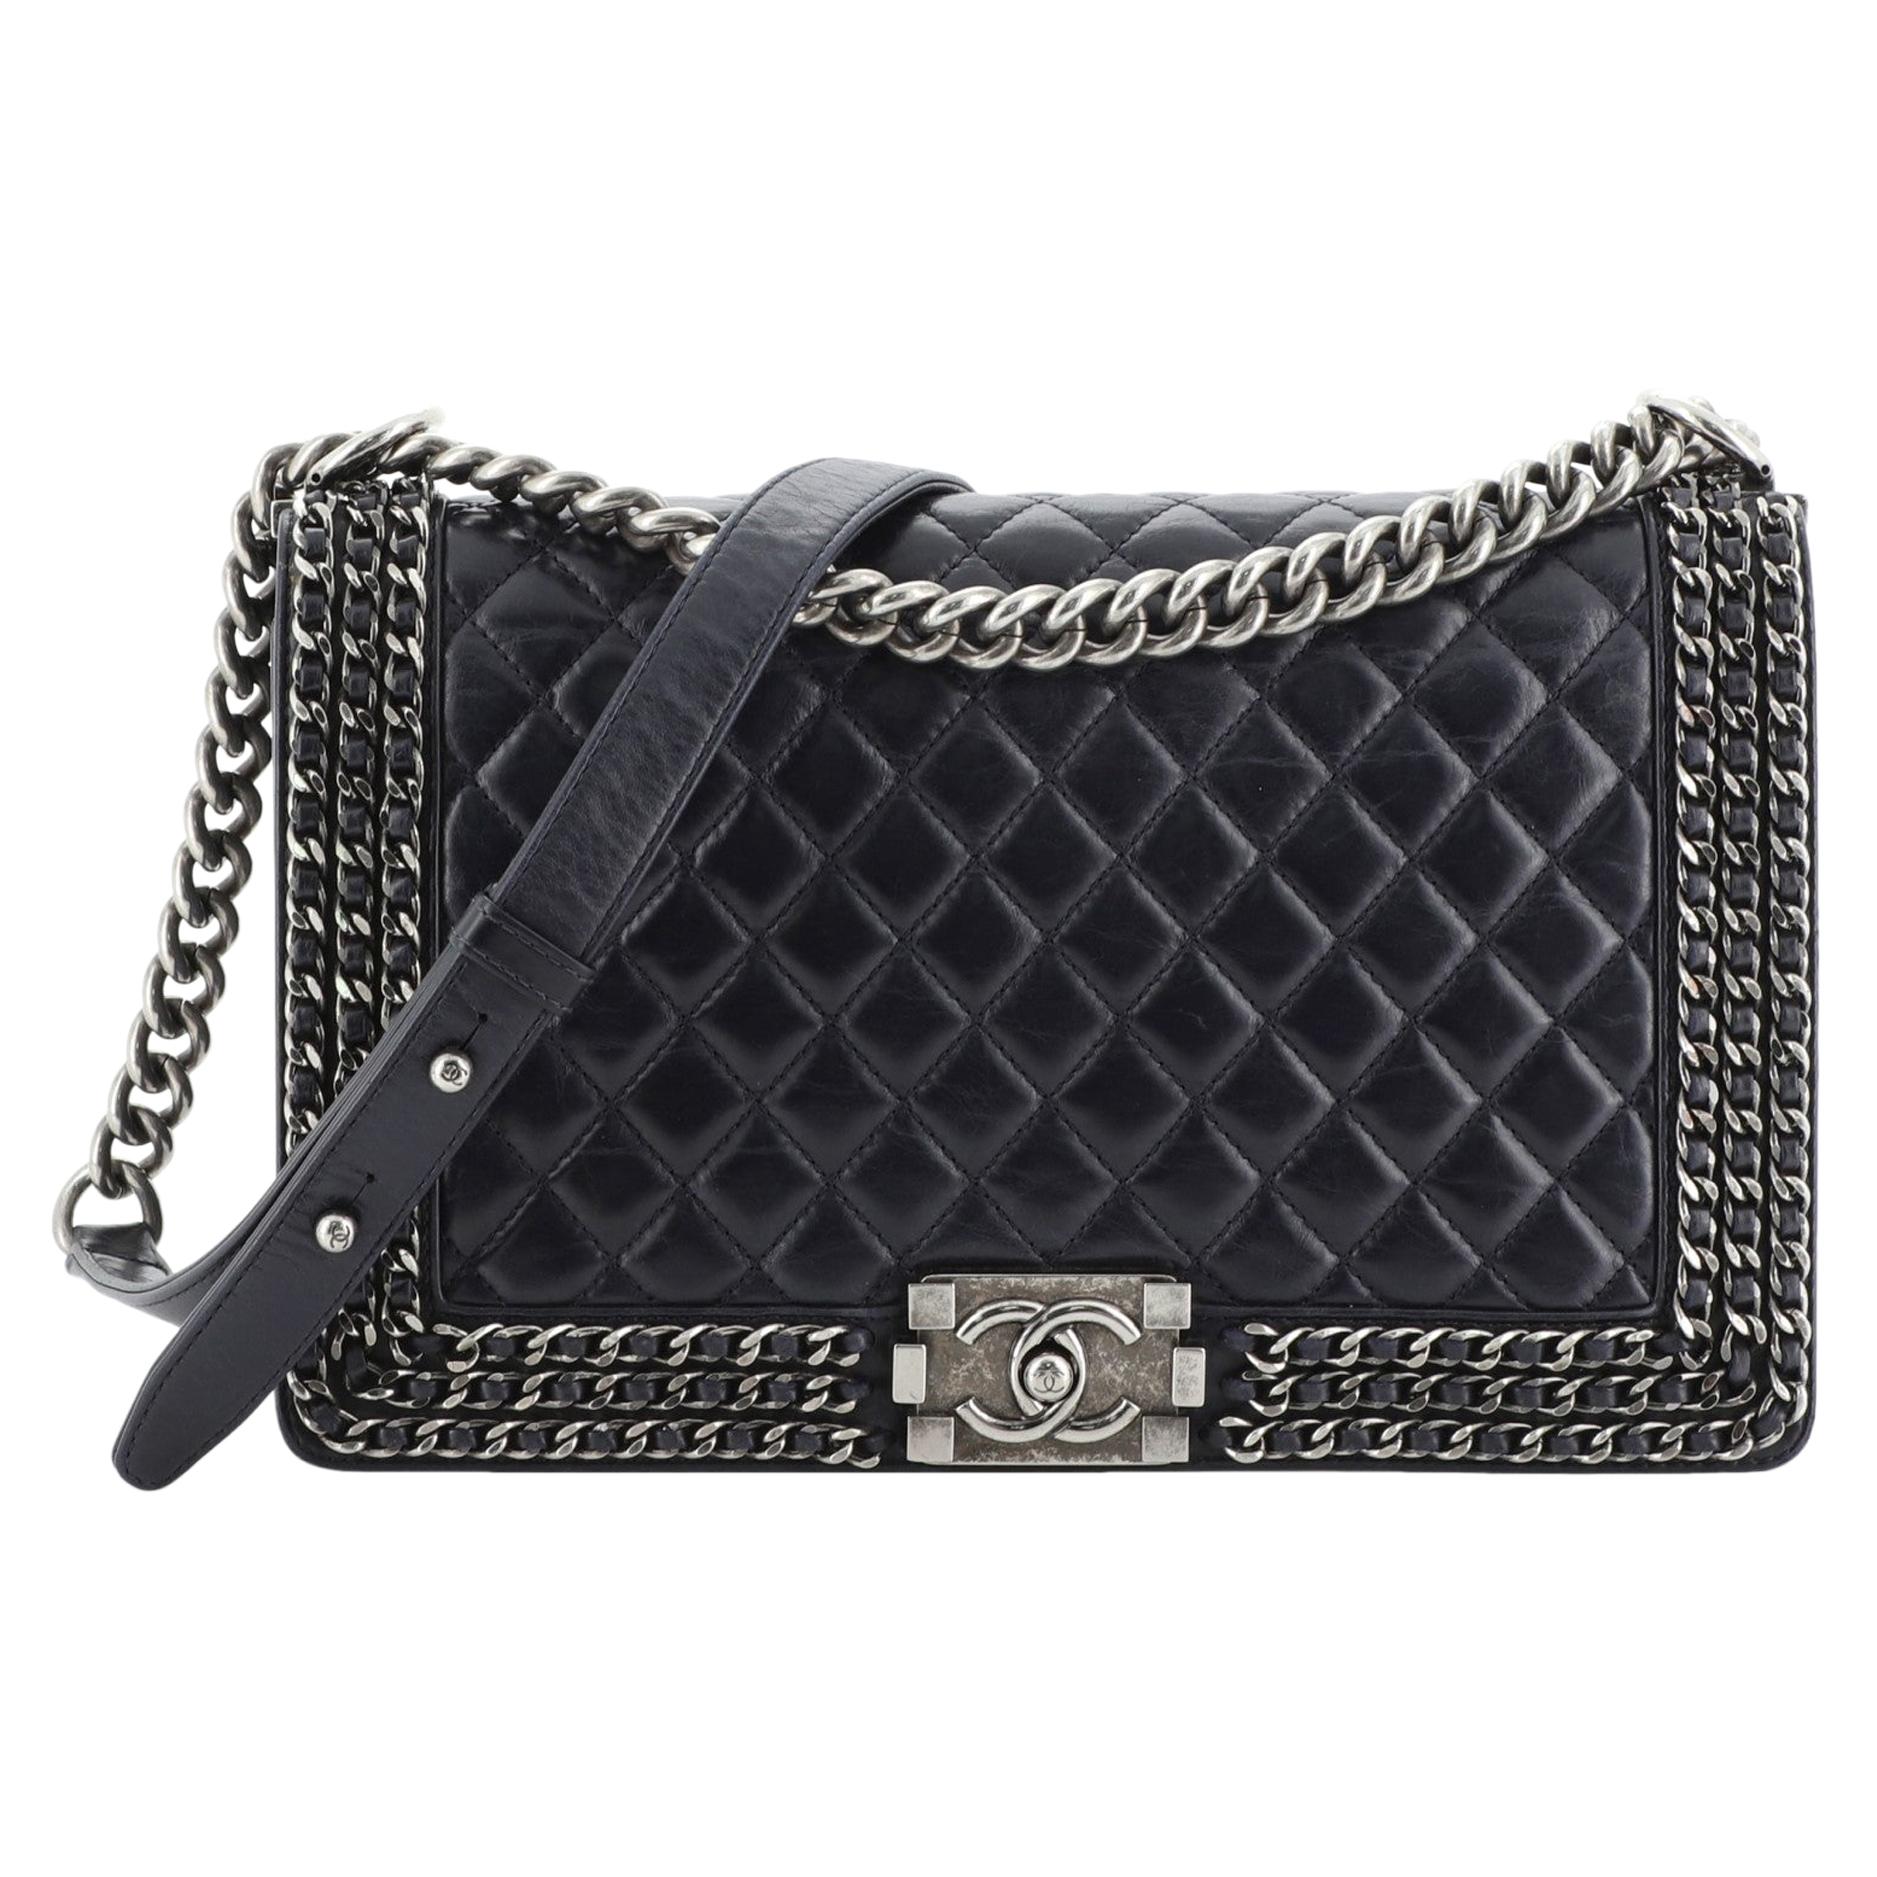 Chanel Chained Boy Flap Bag